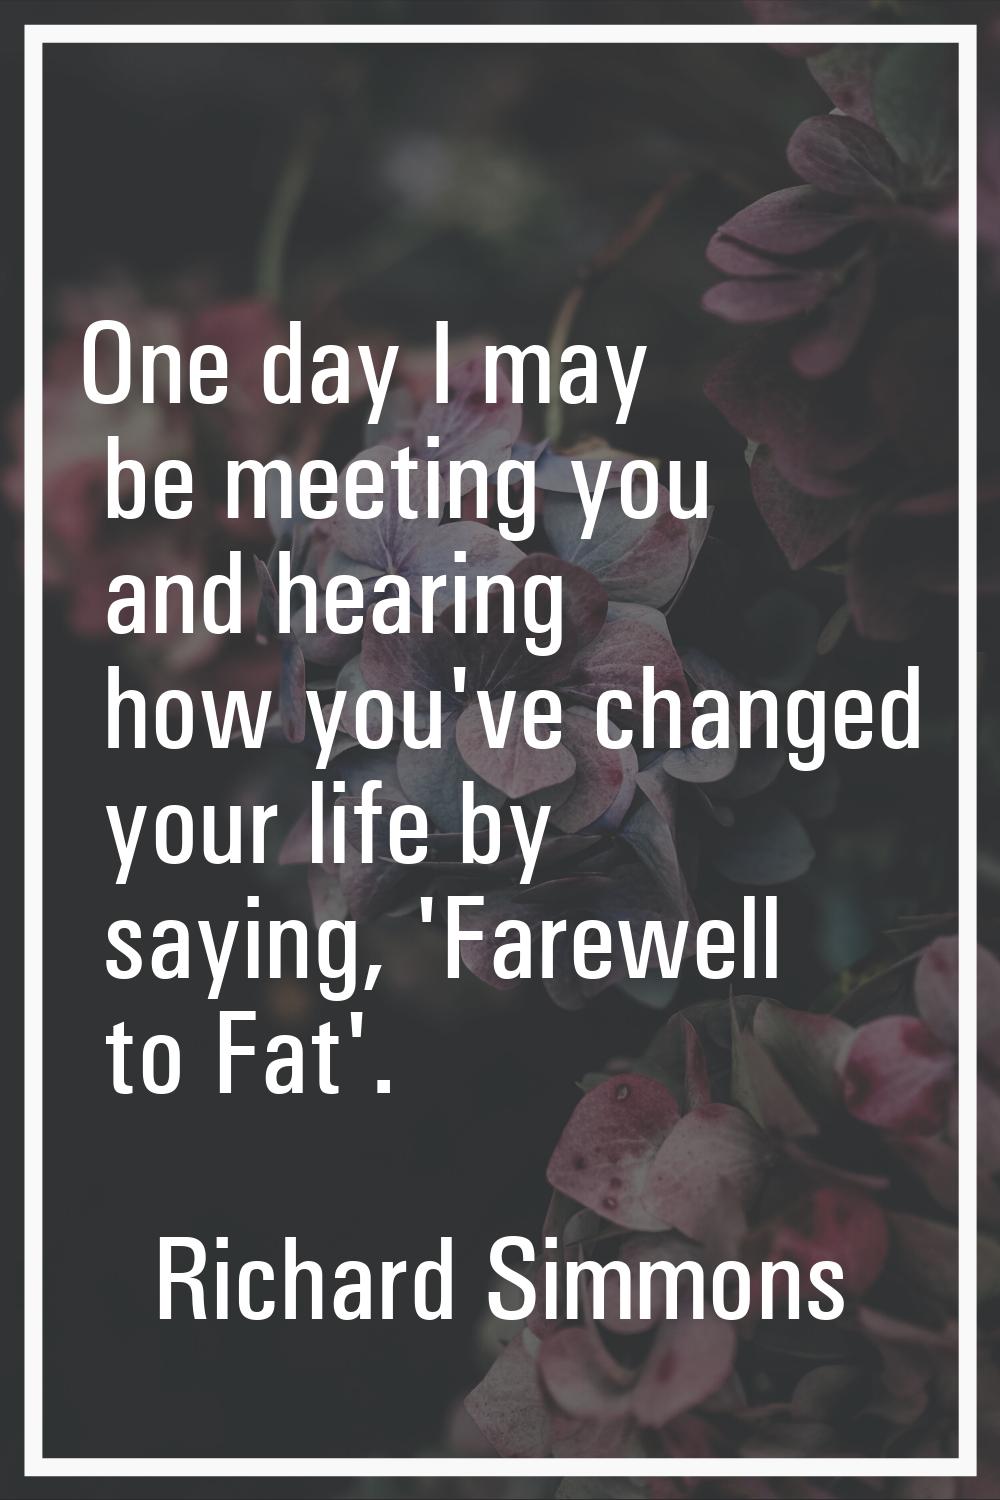 One day I may be meeting you and hearing how you've changed your life by saying, 'Farewell to Fat'.